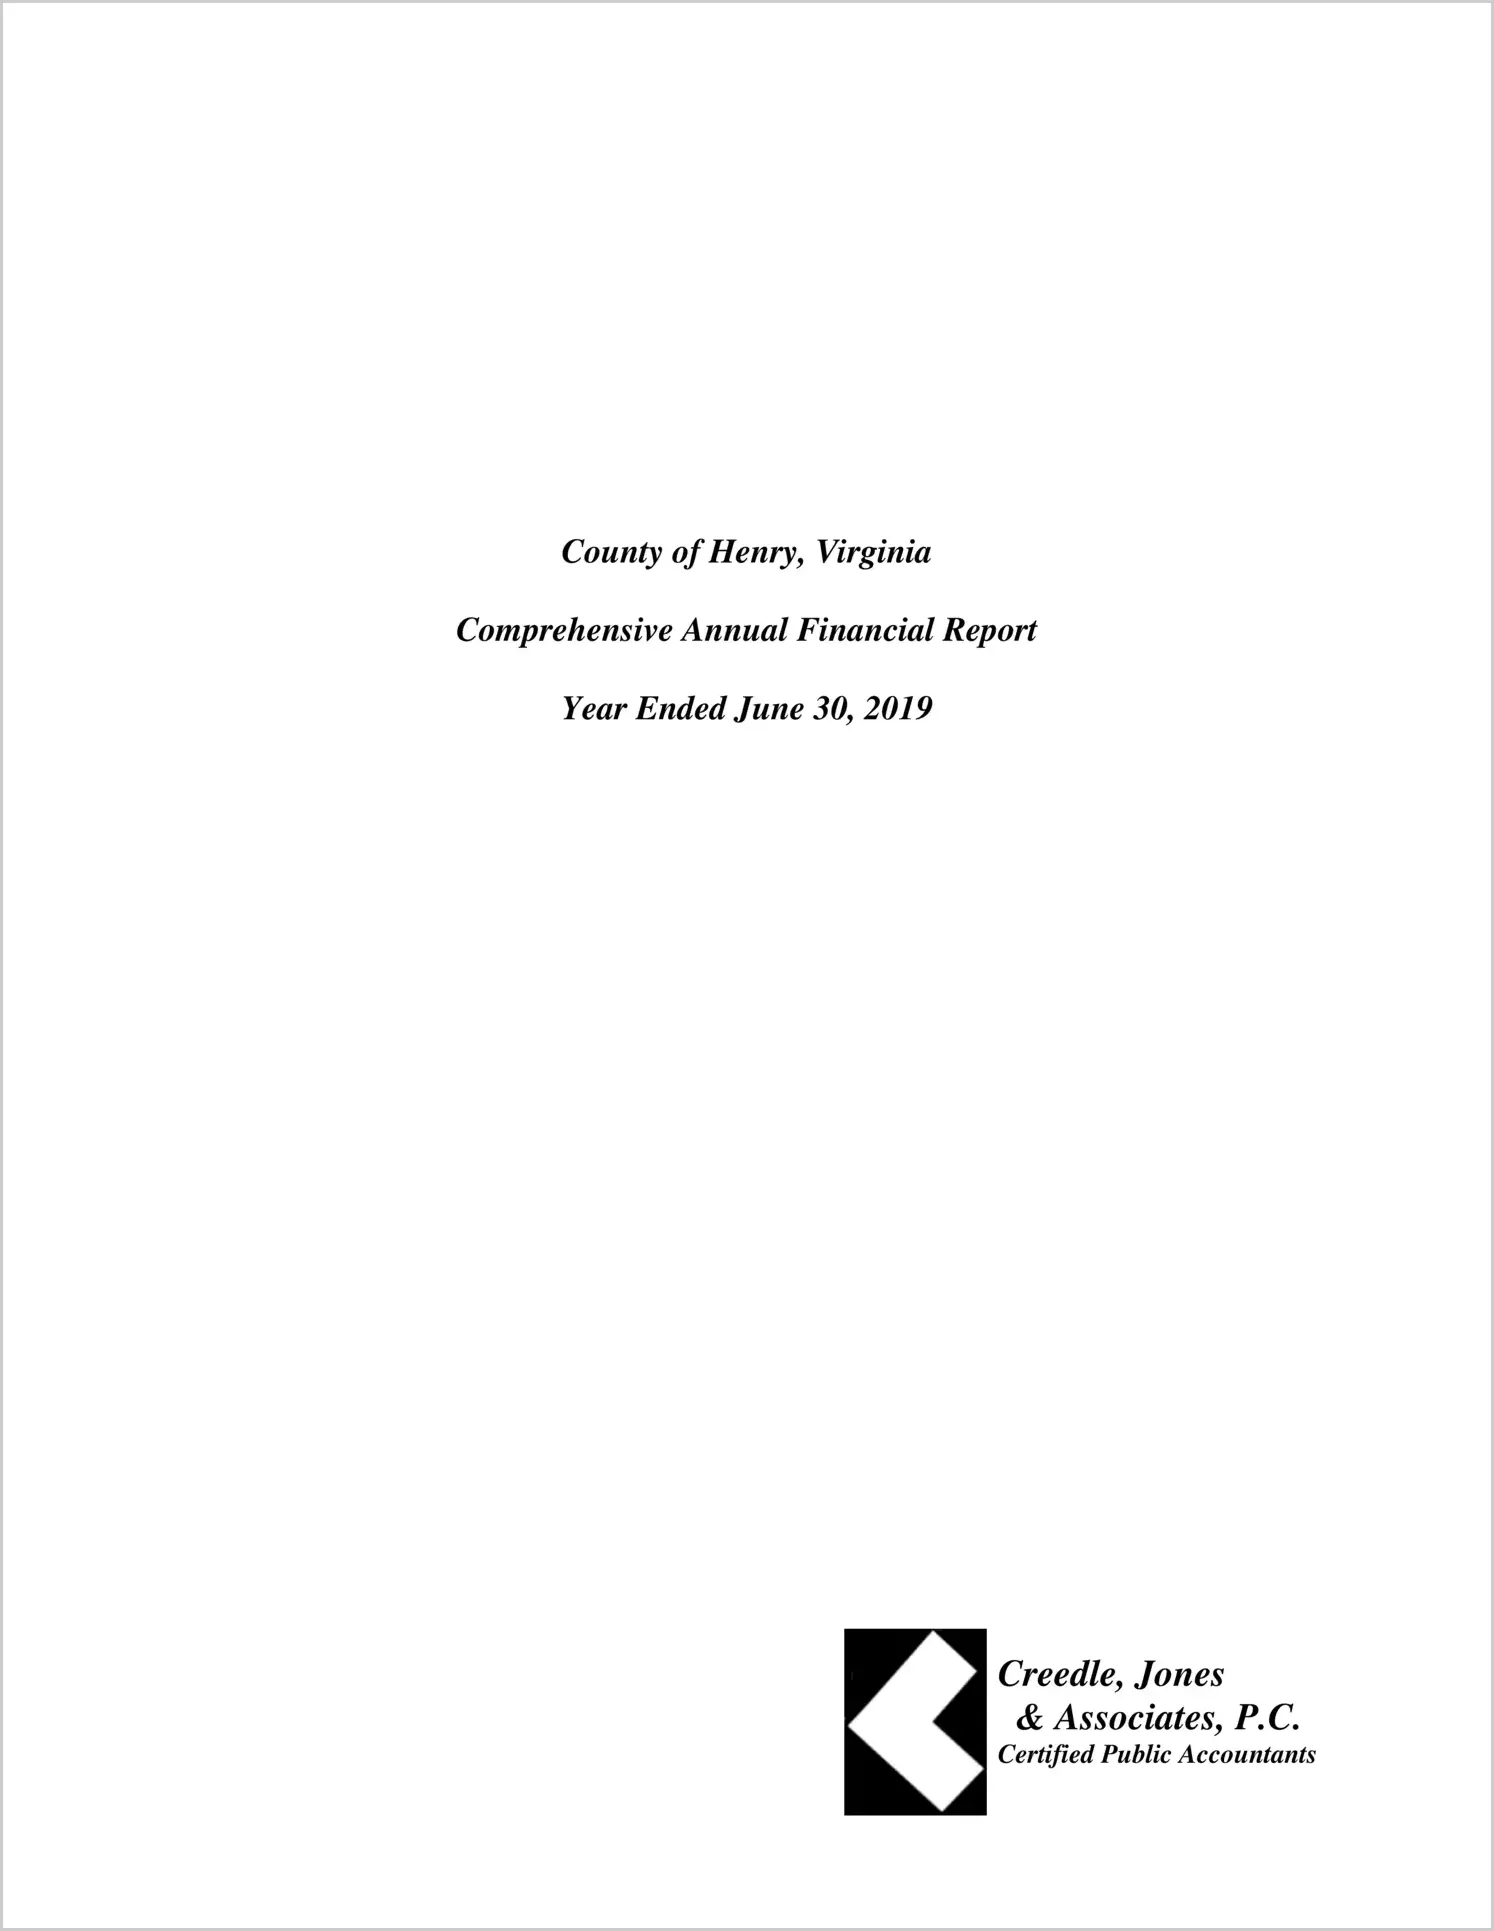 2019 Annual Financial Report for County of Henry